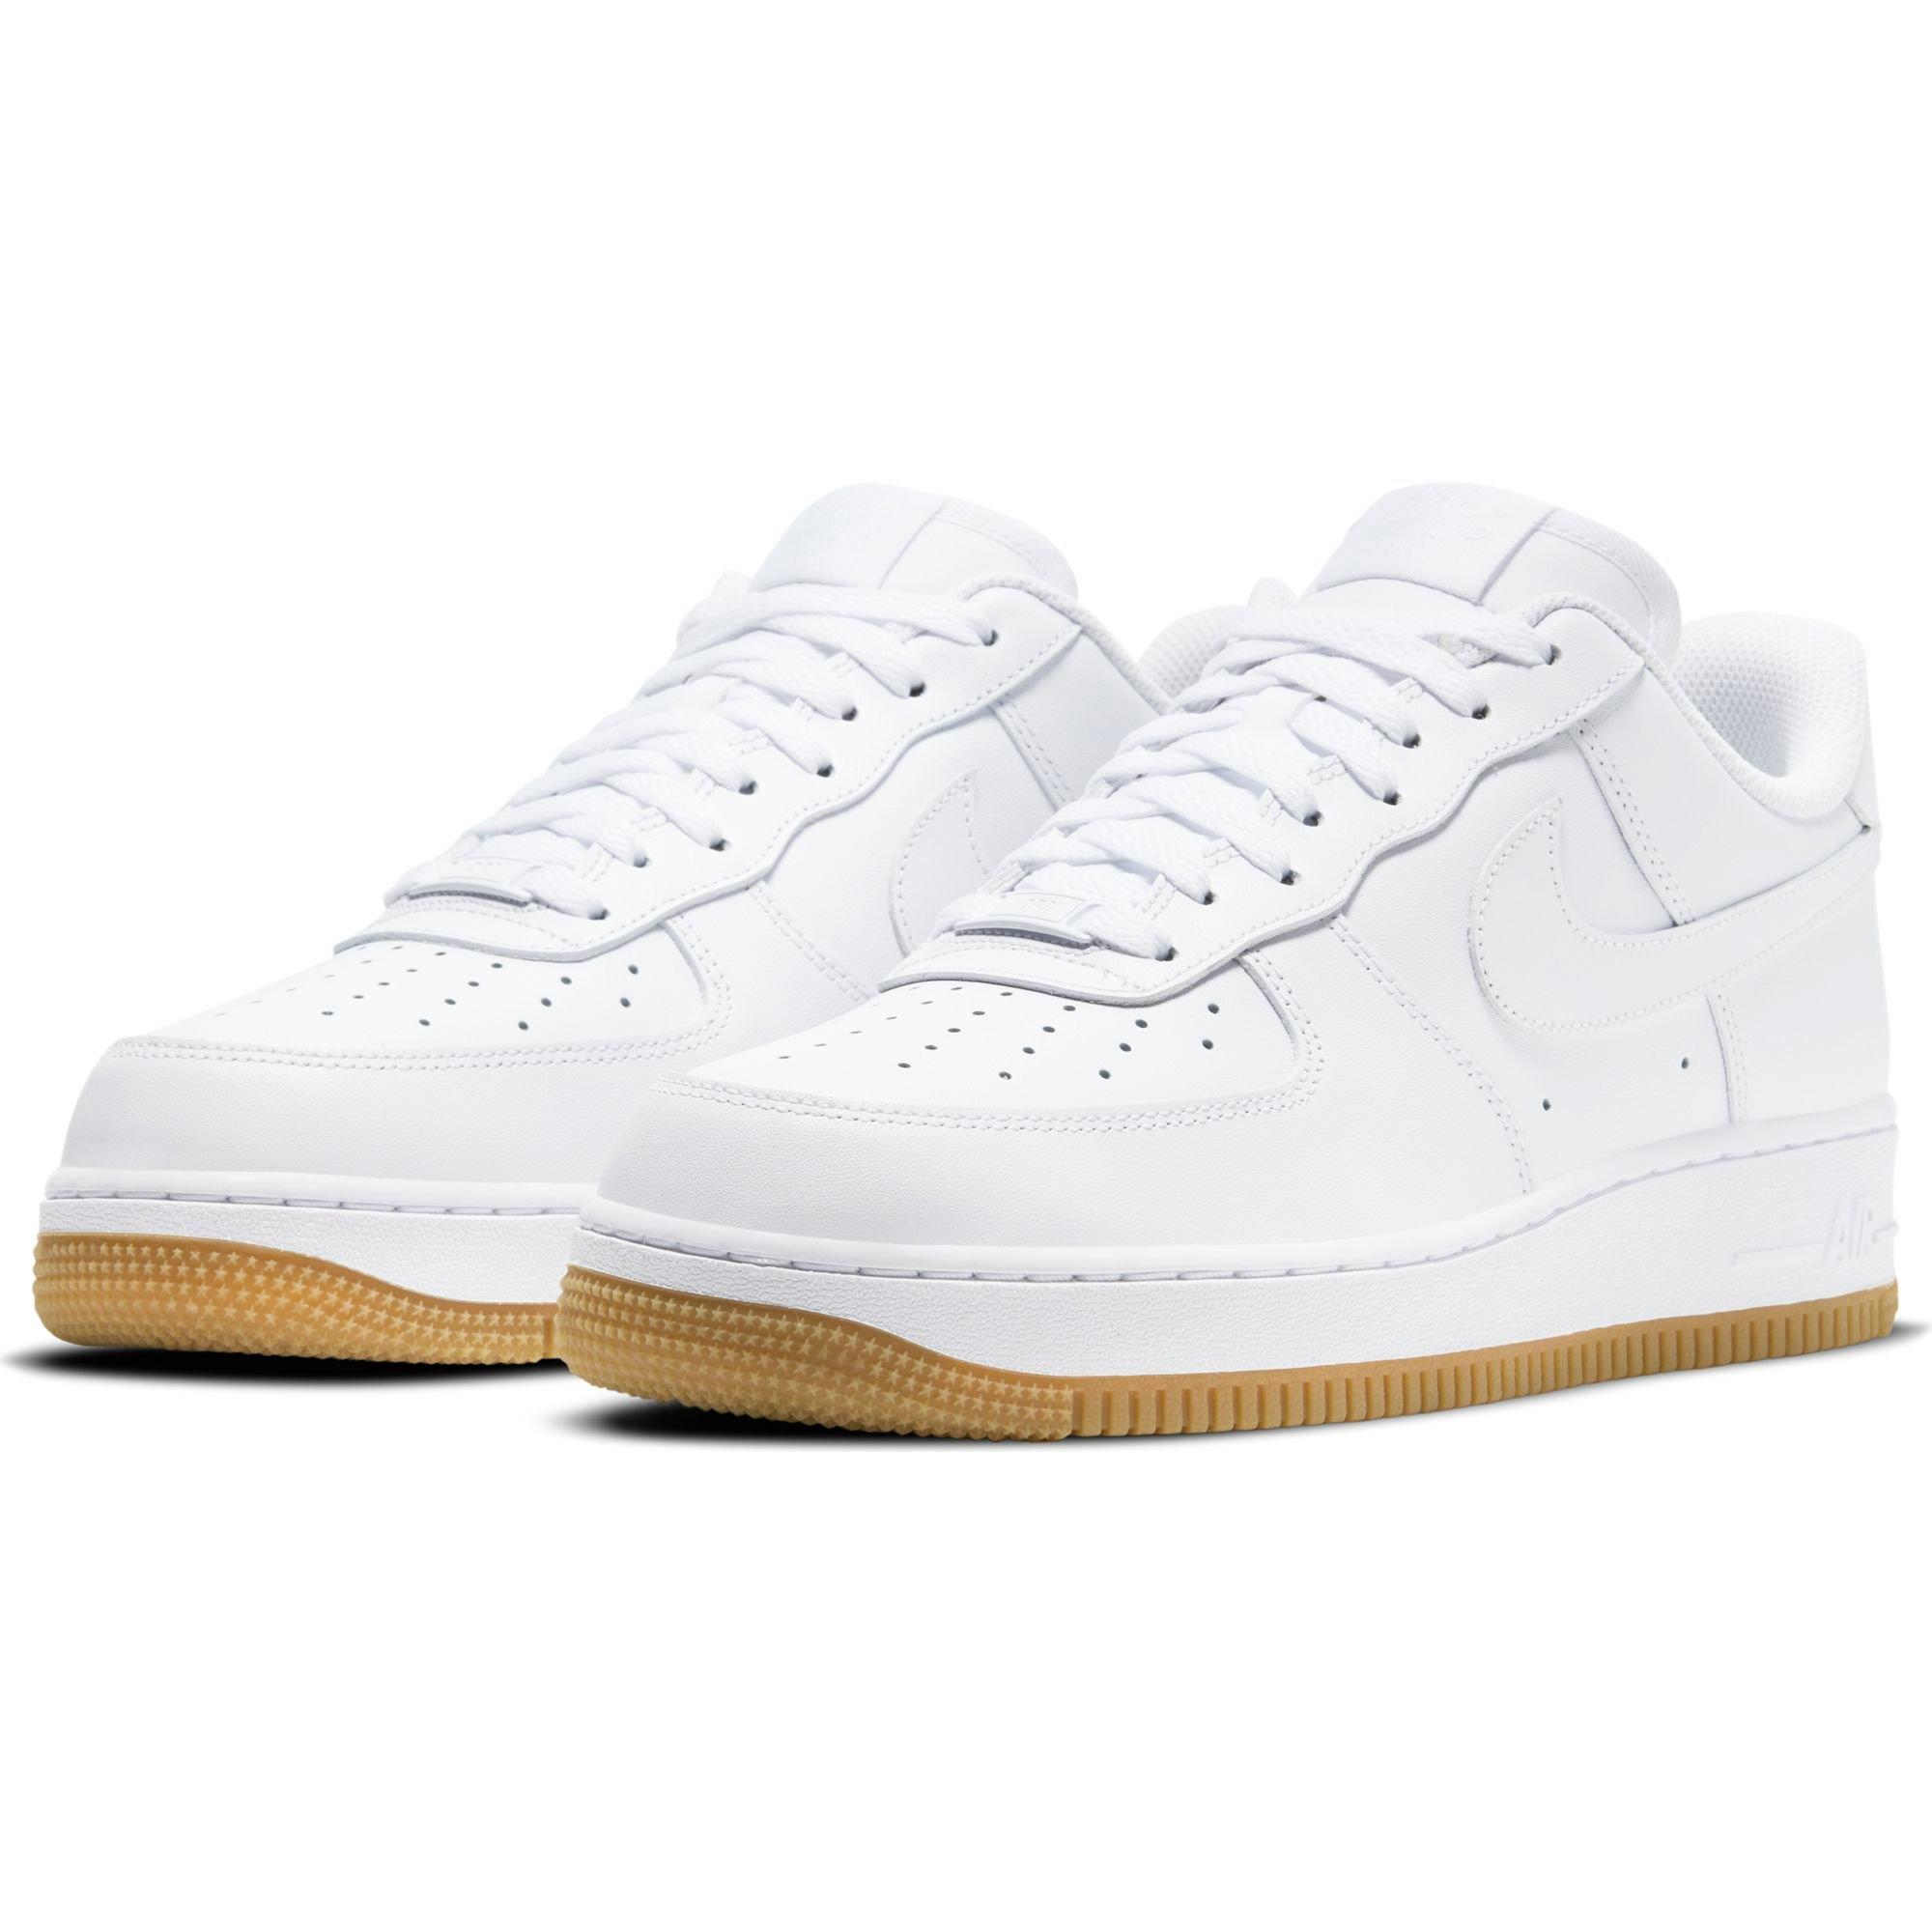 Nike Air Force 1 '07 Sneakers in White and Gum